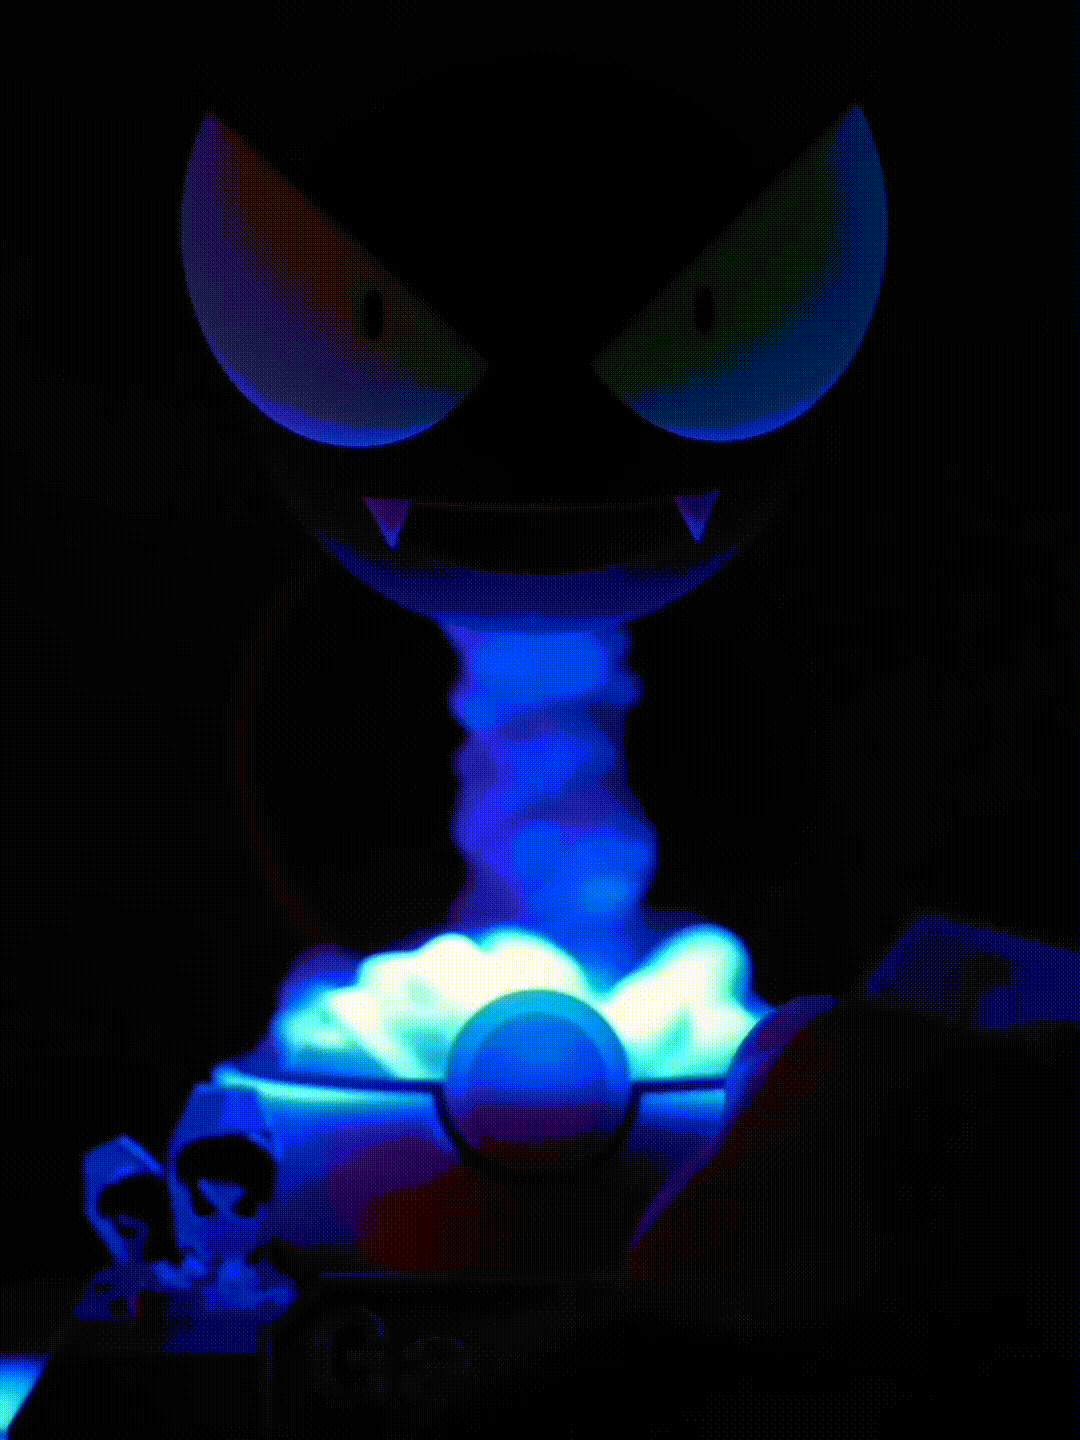 Gastly Humidifier 2.0 Pro Gif - 3D printed luminous Pokémon humidifier with advanced mist emission, UV disinfection, and blue purple ambient night light glow.